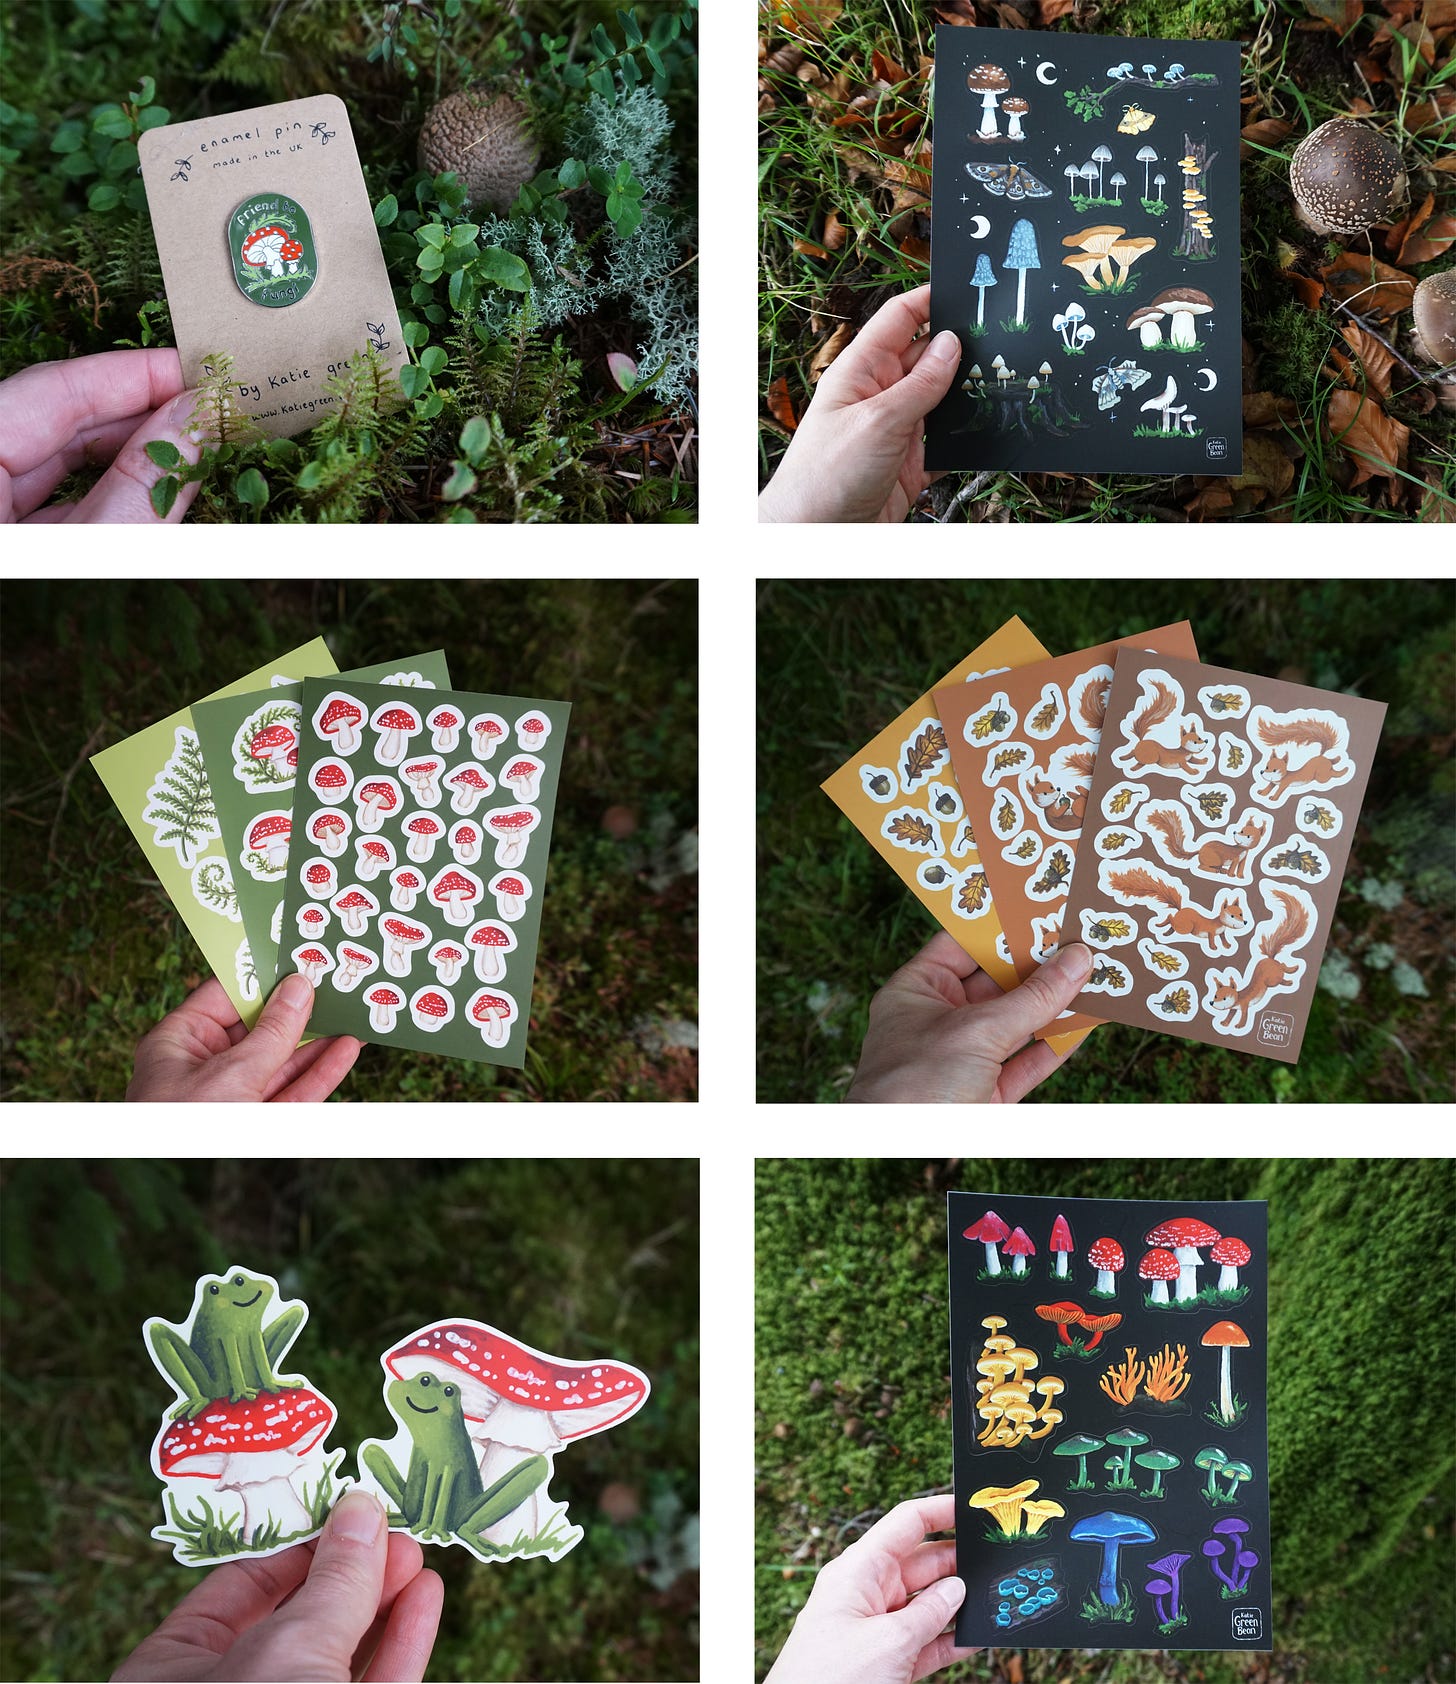 A selection of photos of mushroom-themed illustrated stickers and pins from my shop